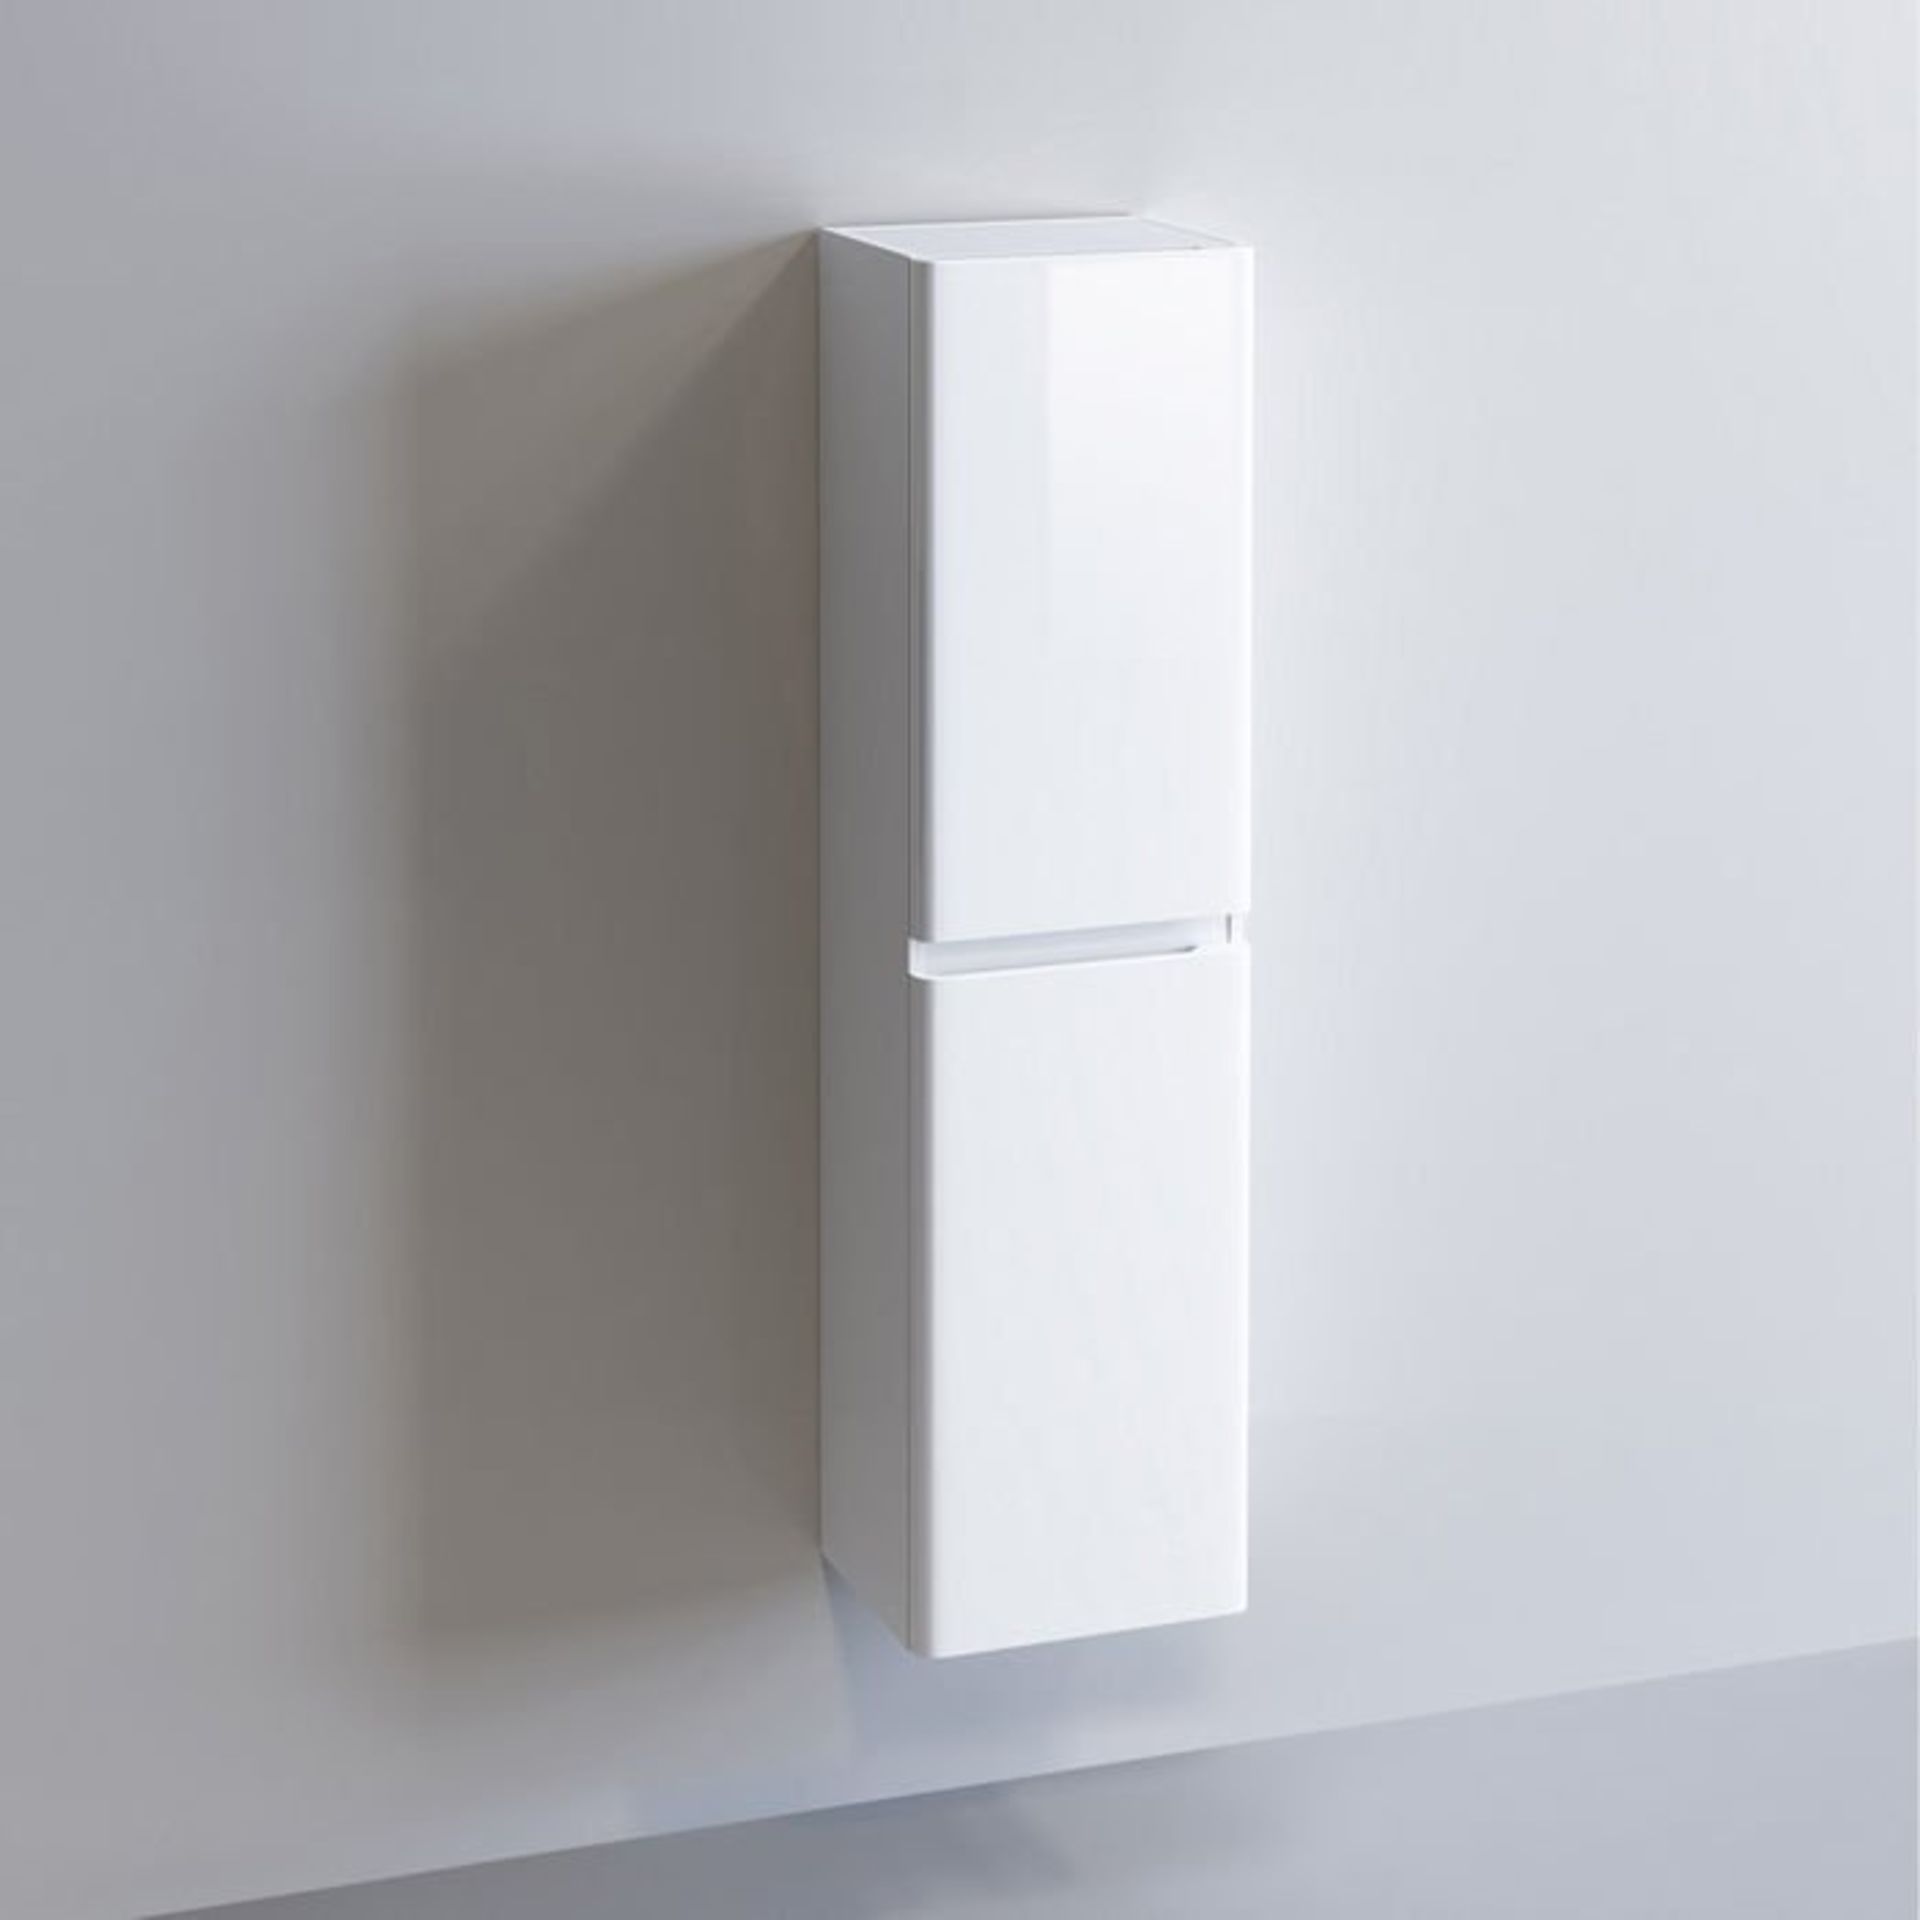 (G68) 1400mm Denver II Gloss White Tall Storage Cabinet - Wall Hung RRP £144.99 Great practical - Image 5 of 6